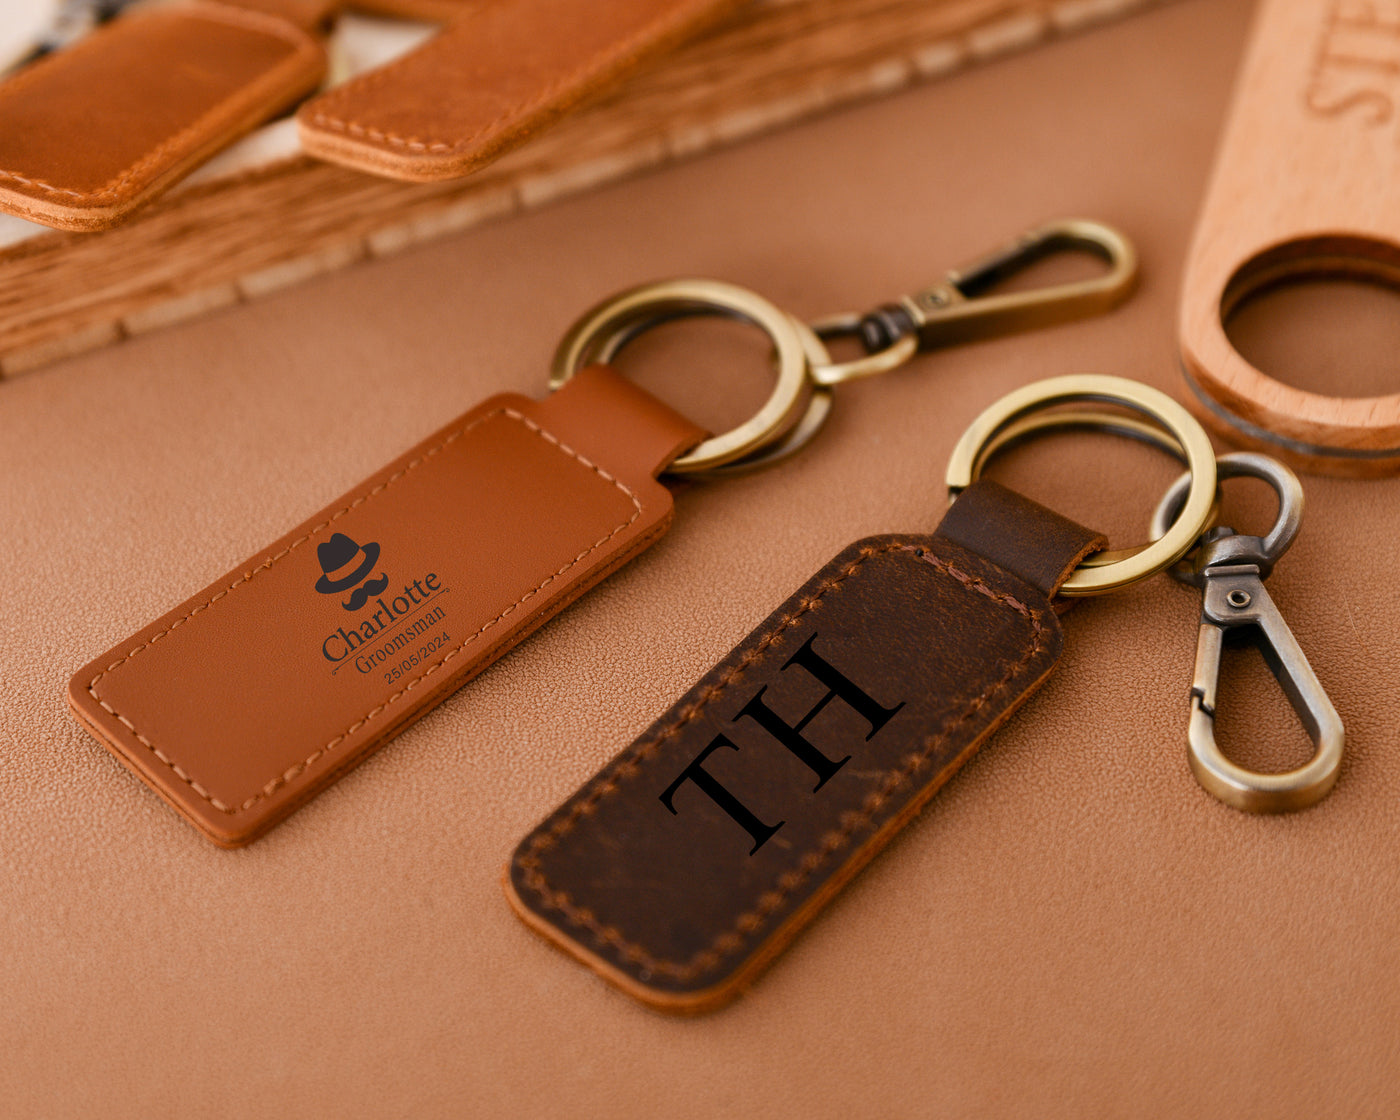 Customized Leather Keychain - Handcrafted Personalized Key Chain for a Touch of Elegance and Individuality